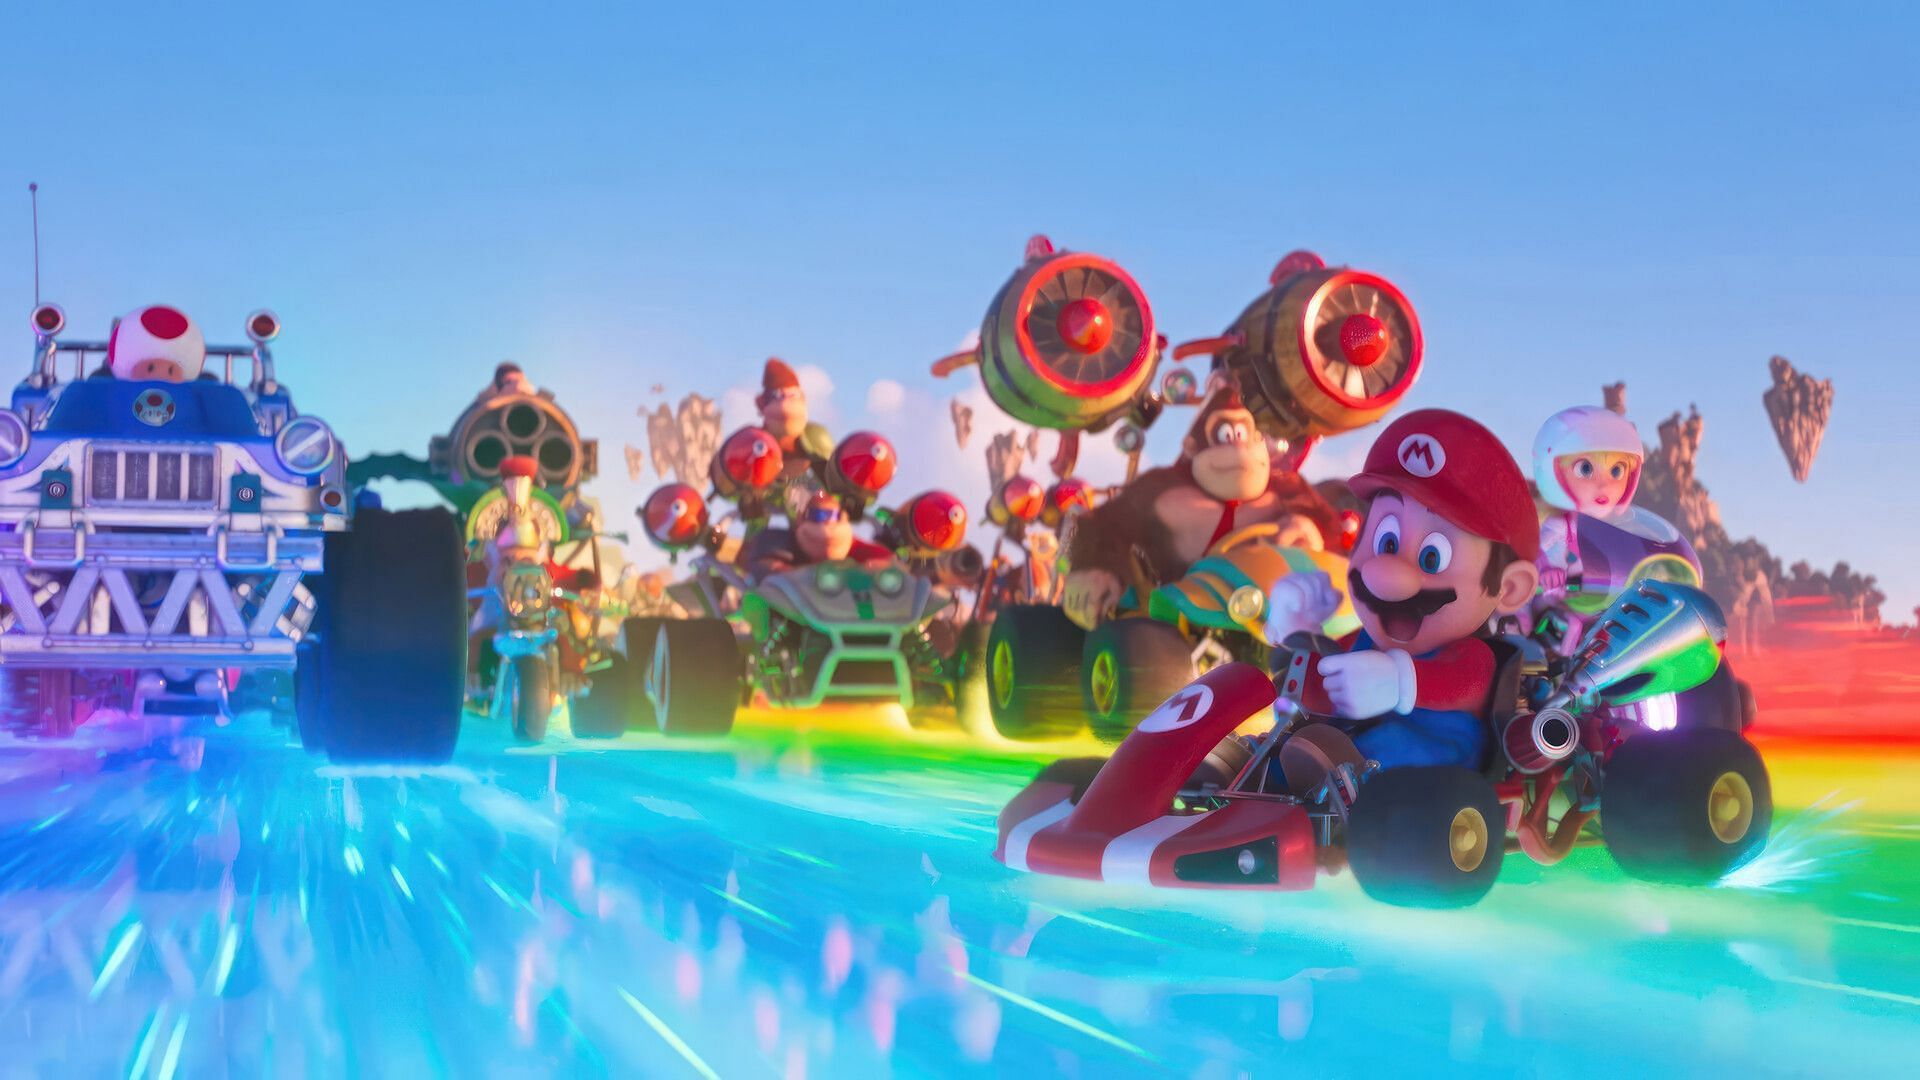 Another exciting Easter egg is when the excitement of the Mario Kart video game is brought to life in Jungle Kingdom. (Image via Universal Pictures)